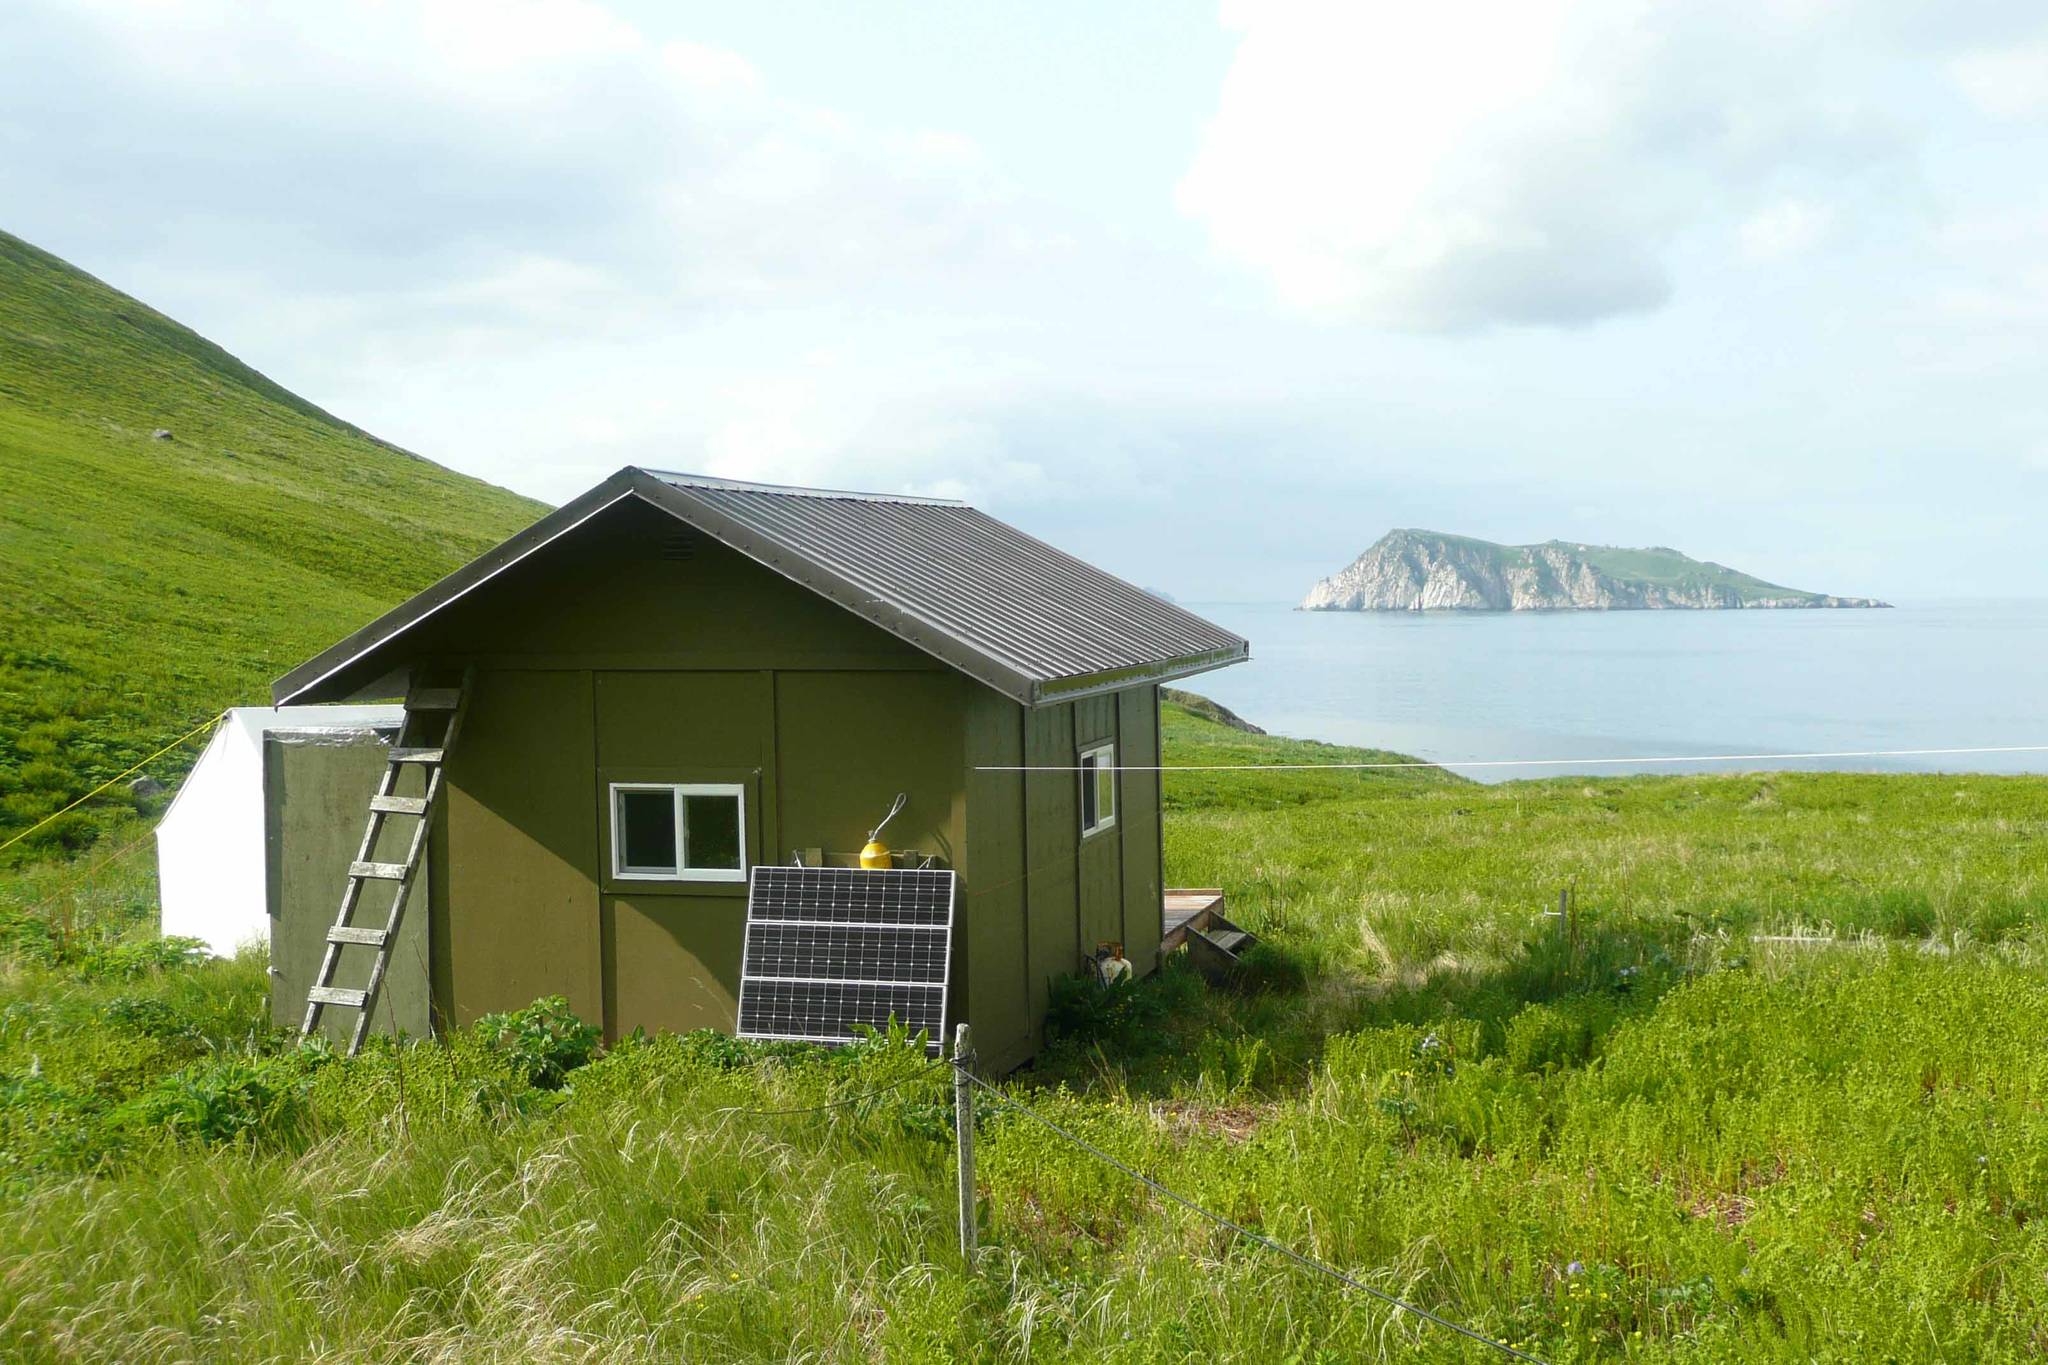 A cabin on Chowiet Island off the Alaska Peninsula in which two biologists were the closest humans to a recent magnitude 8.2 earthquake. (Courtesy Photo /Erik Andersen, U.S. Fish and Wildlife Service.)